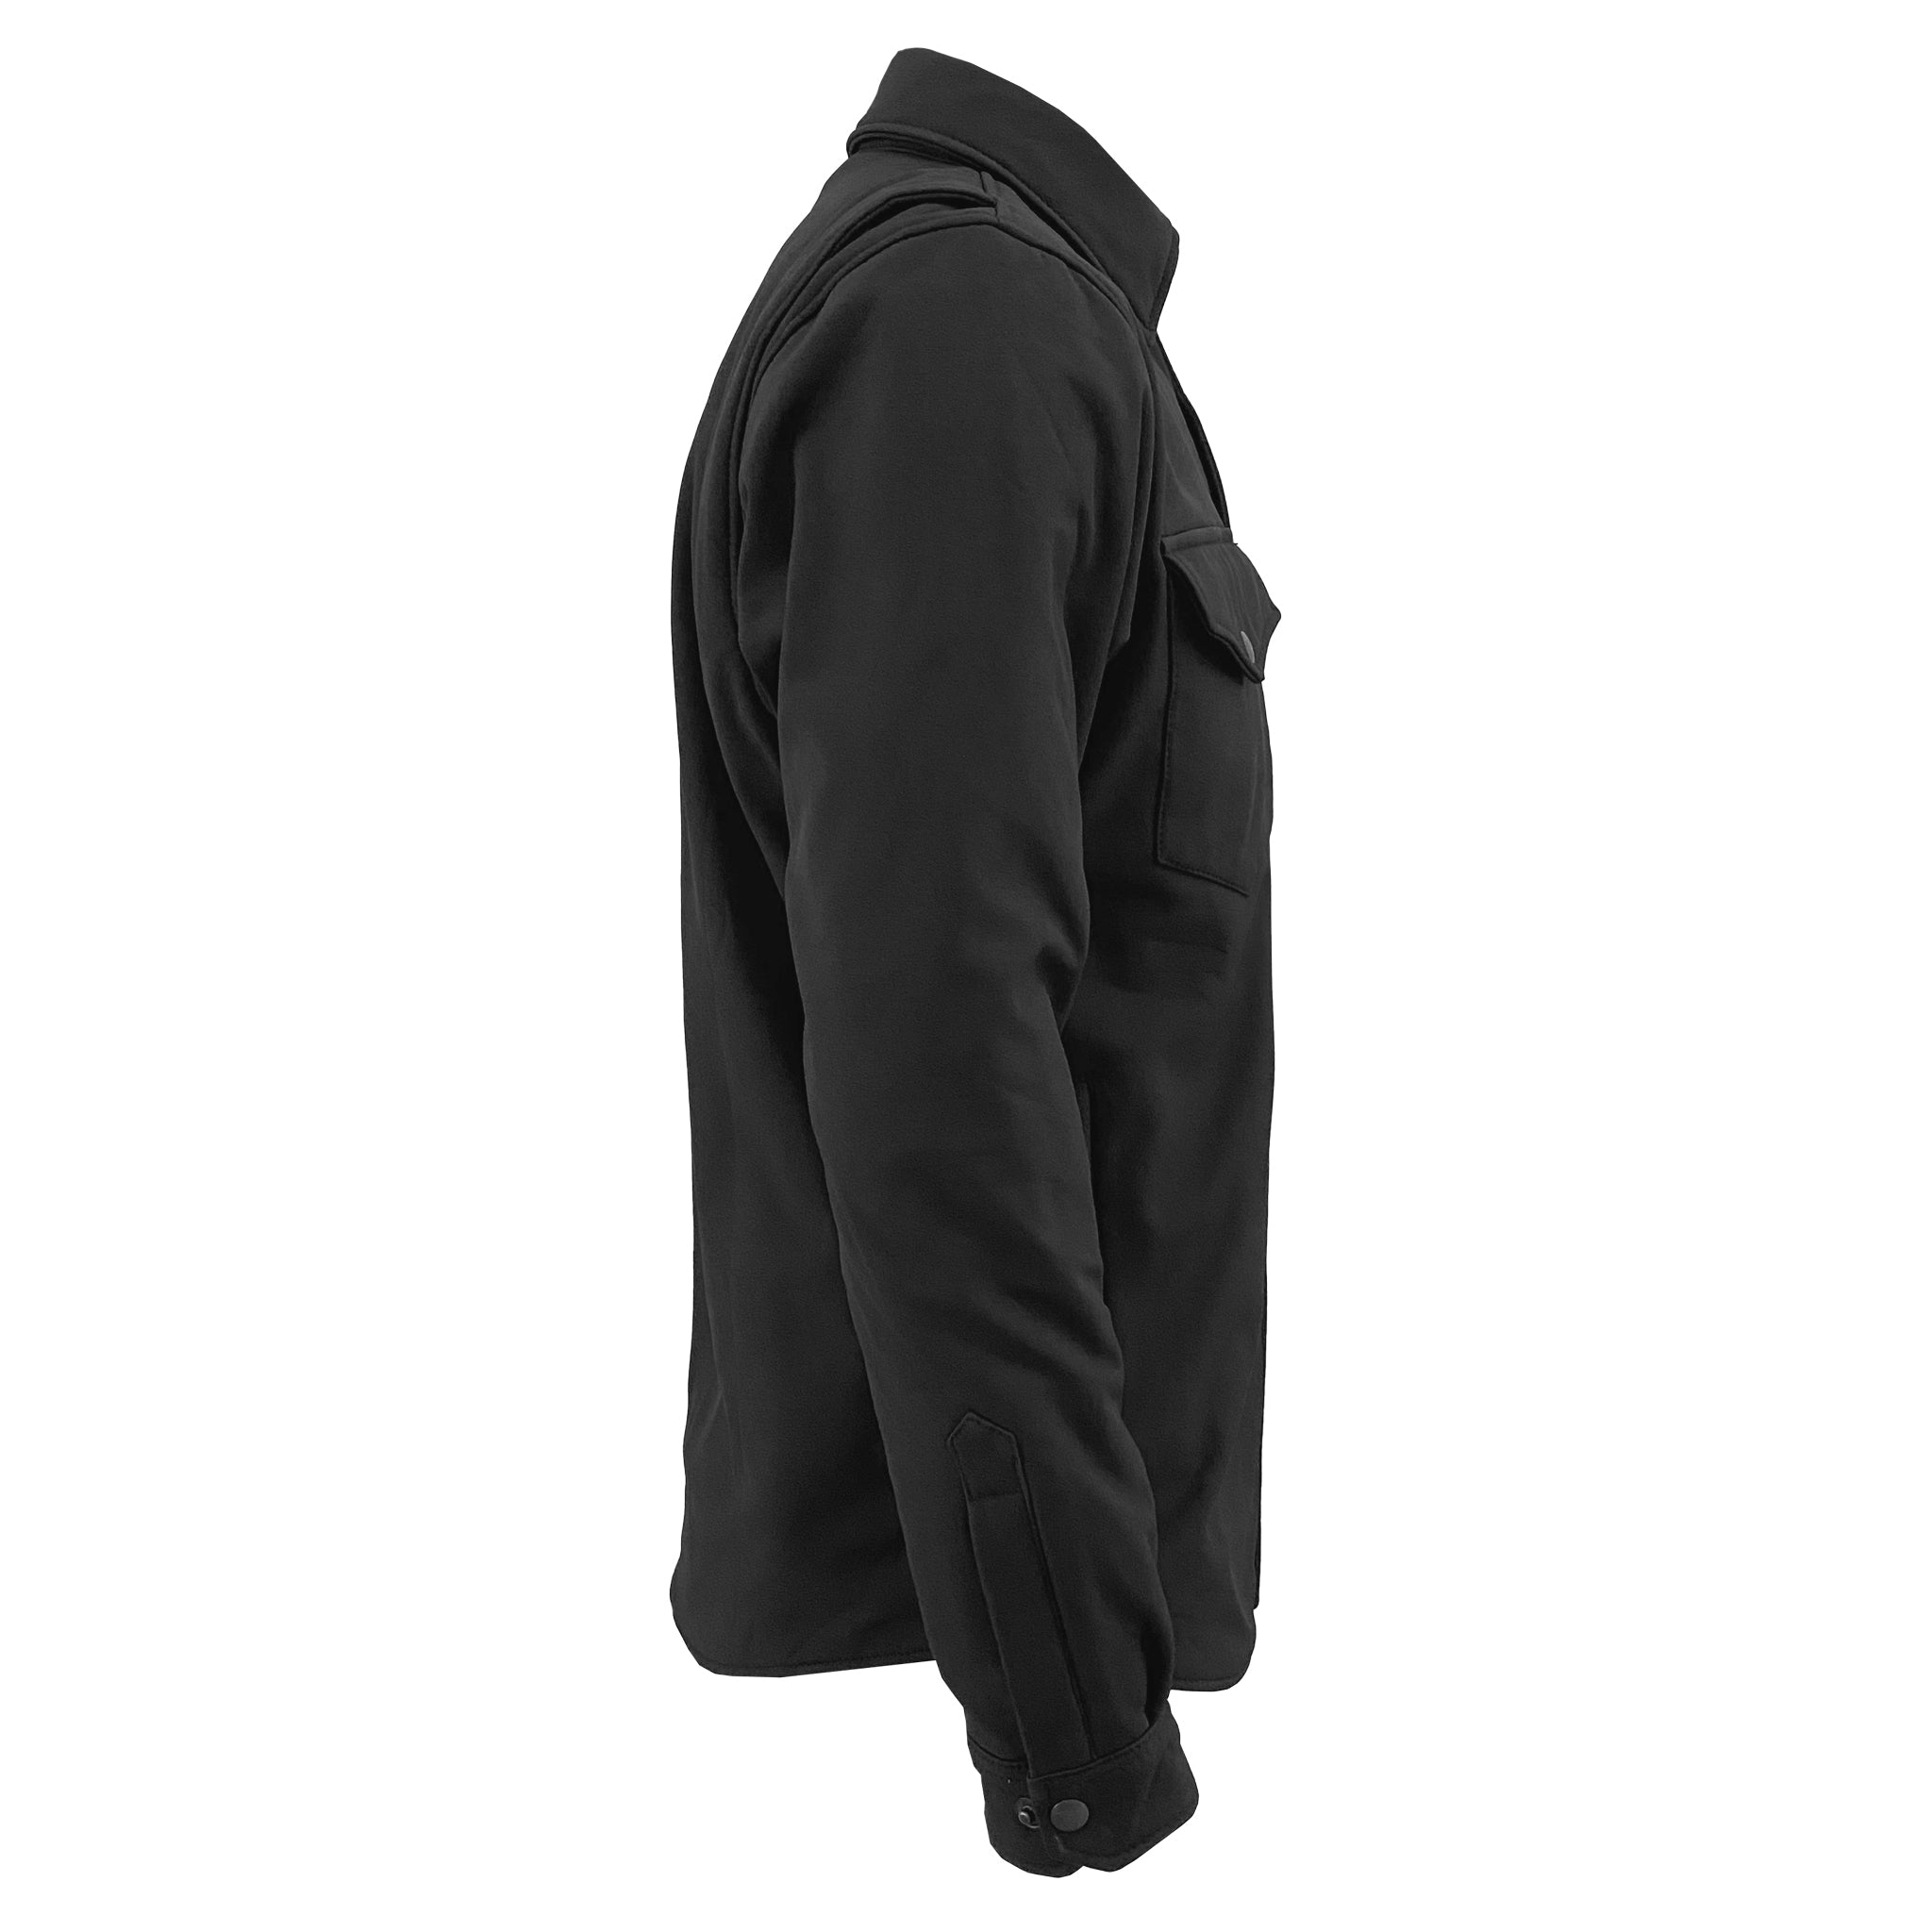 Protective SoftShell Winter Jacket for Men - Black Matte with Pads